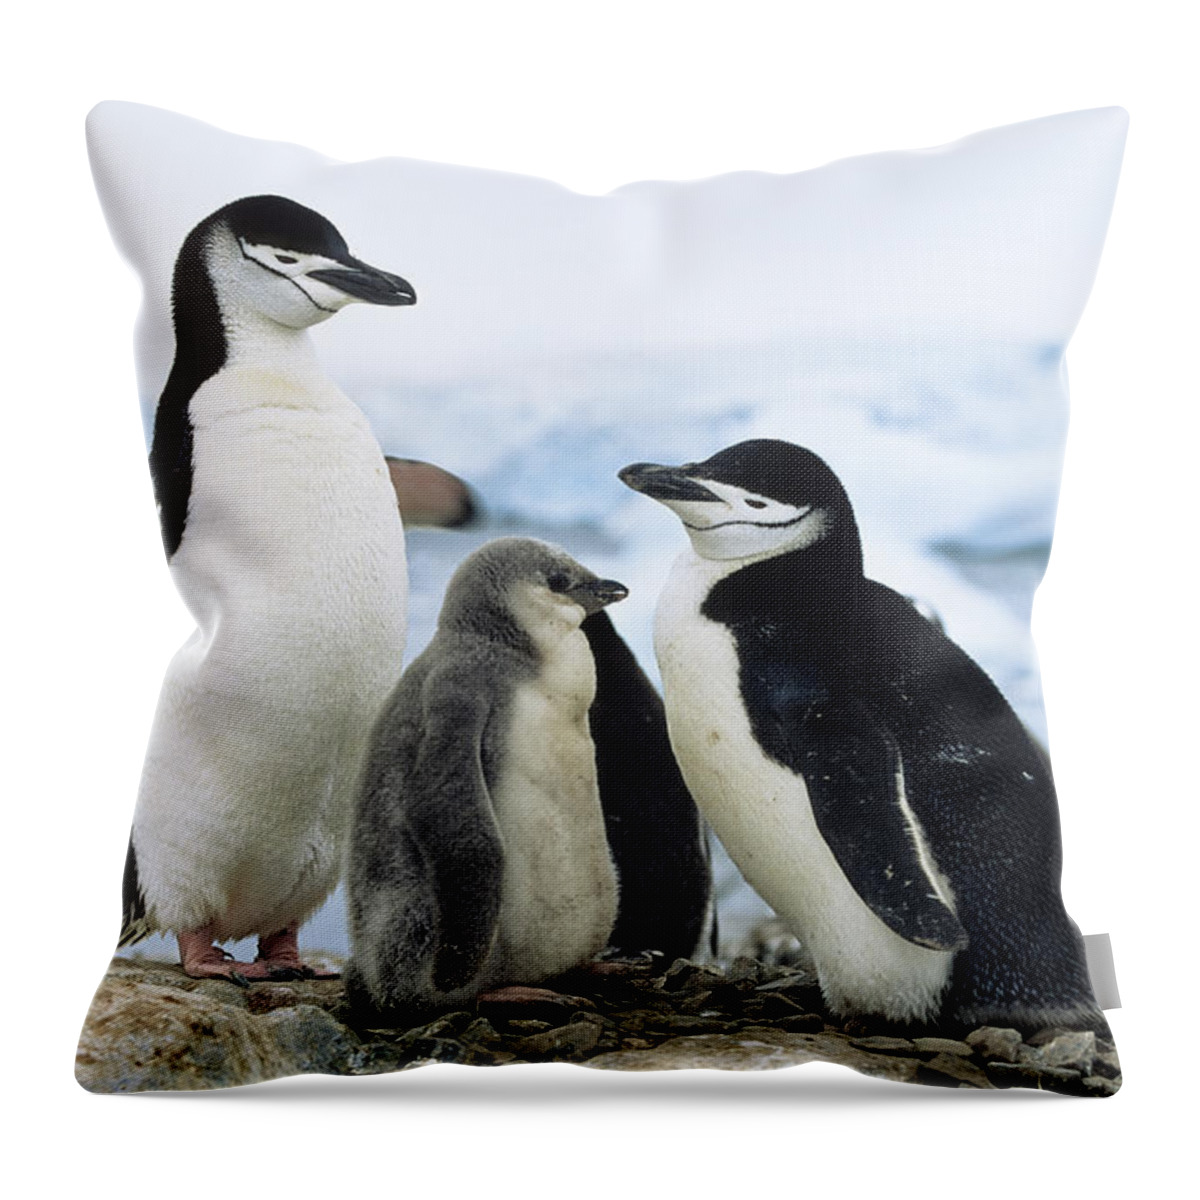 Feb0514 Throw Pillow featuring the photograph Chinstrap Penguins And Chicks Antarctica by Konrad Wothe